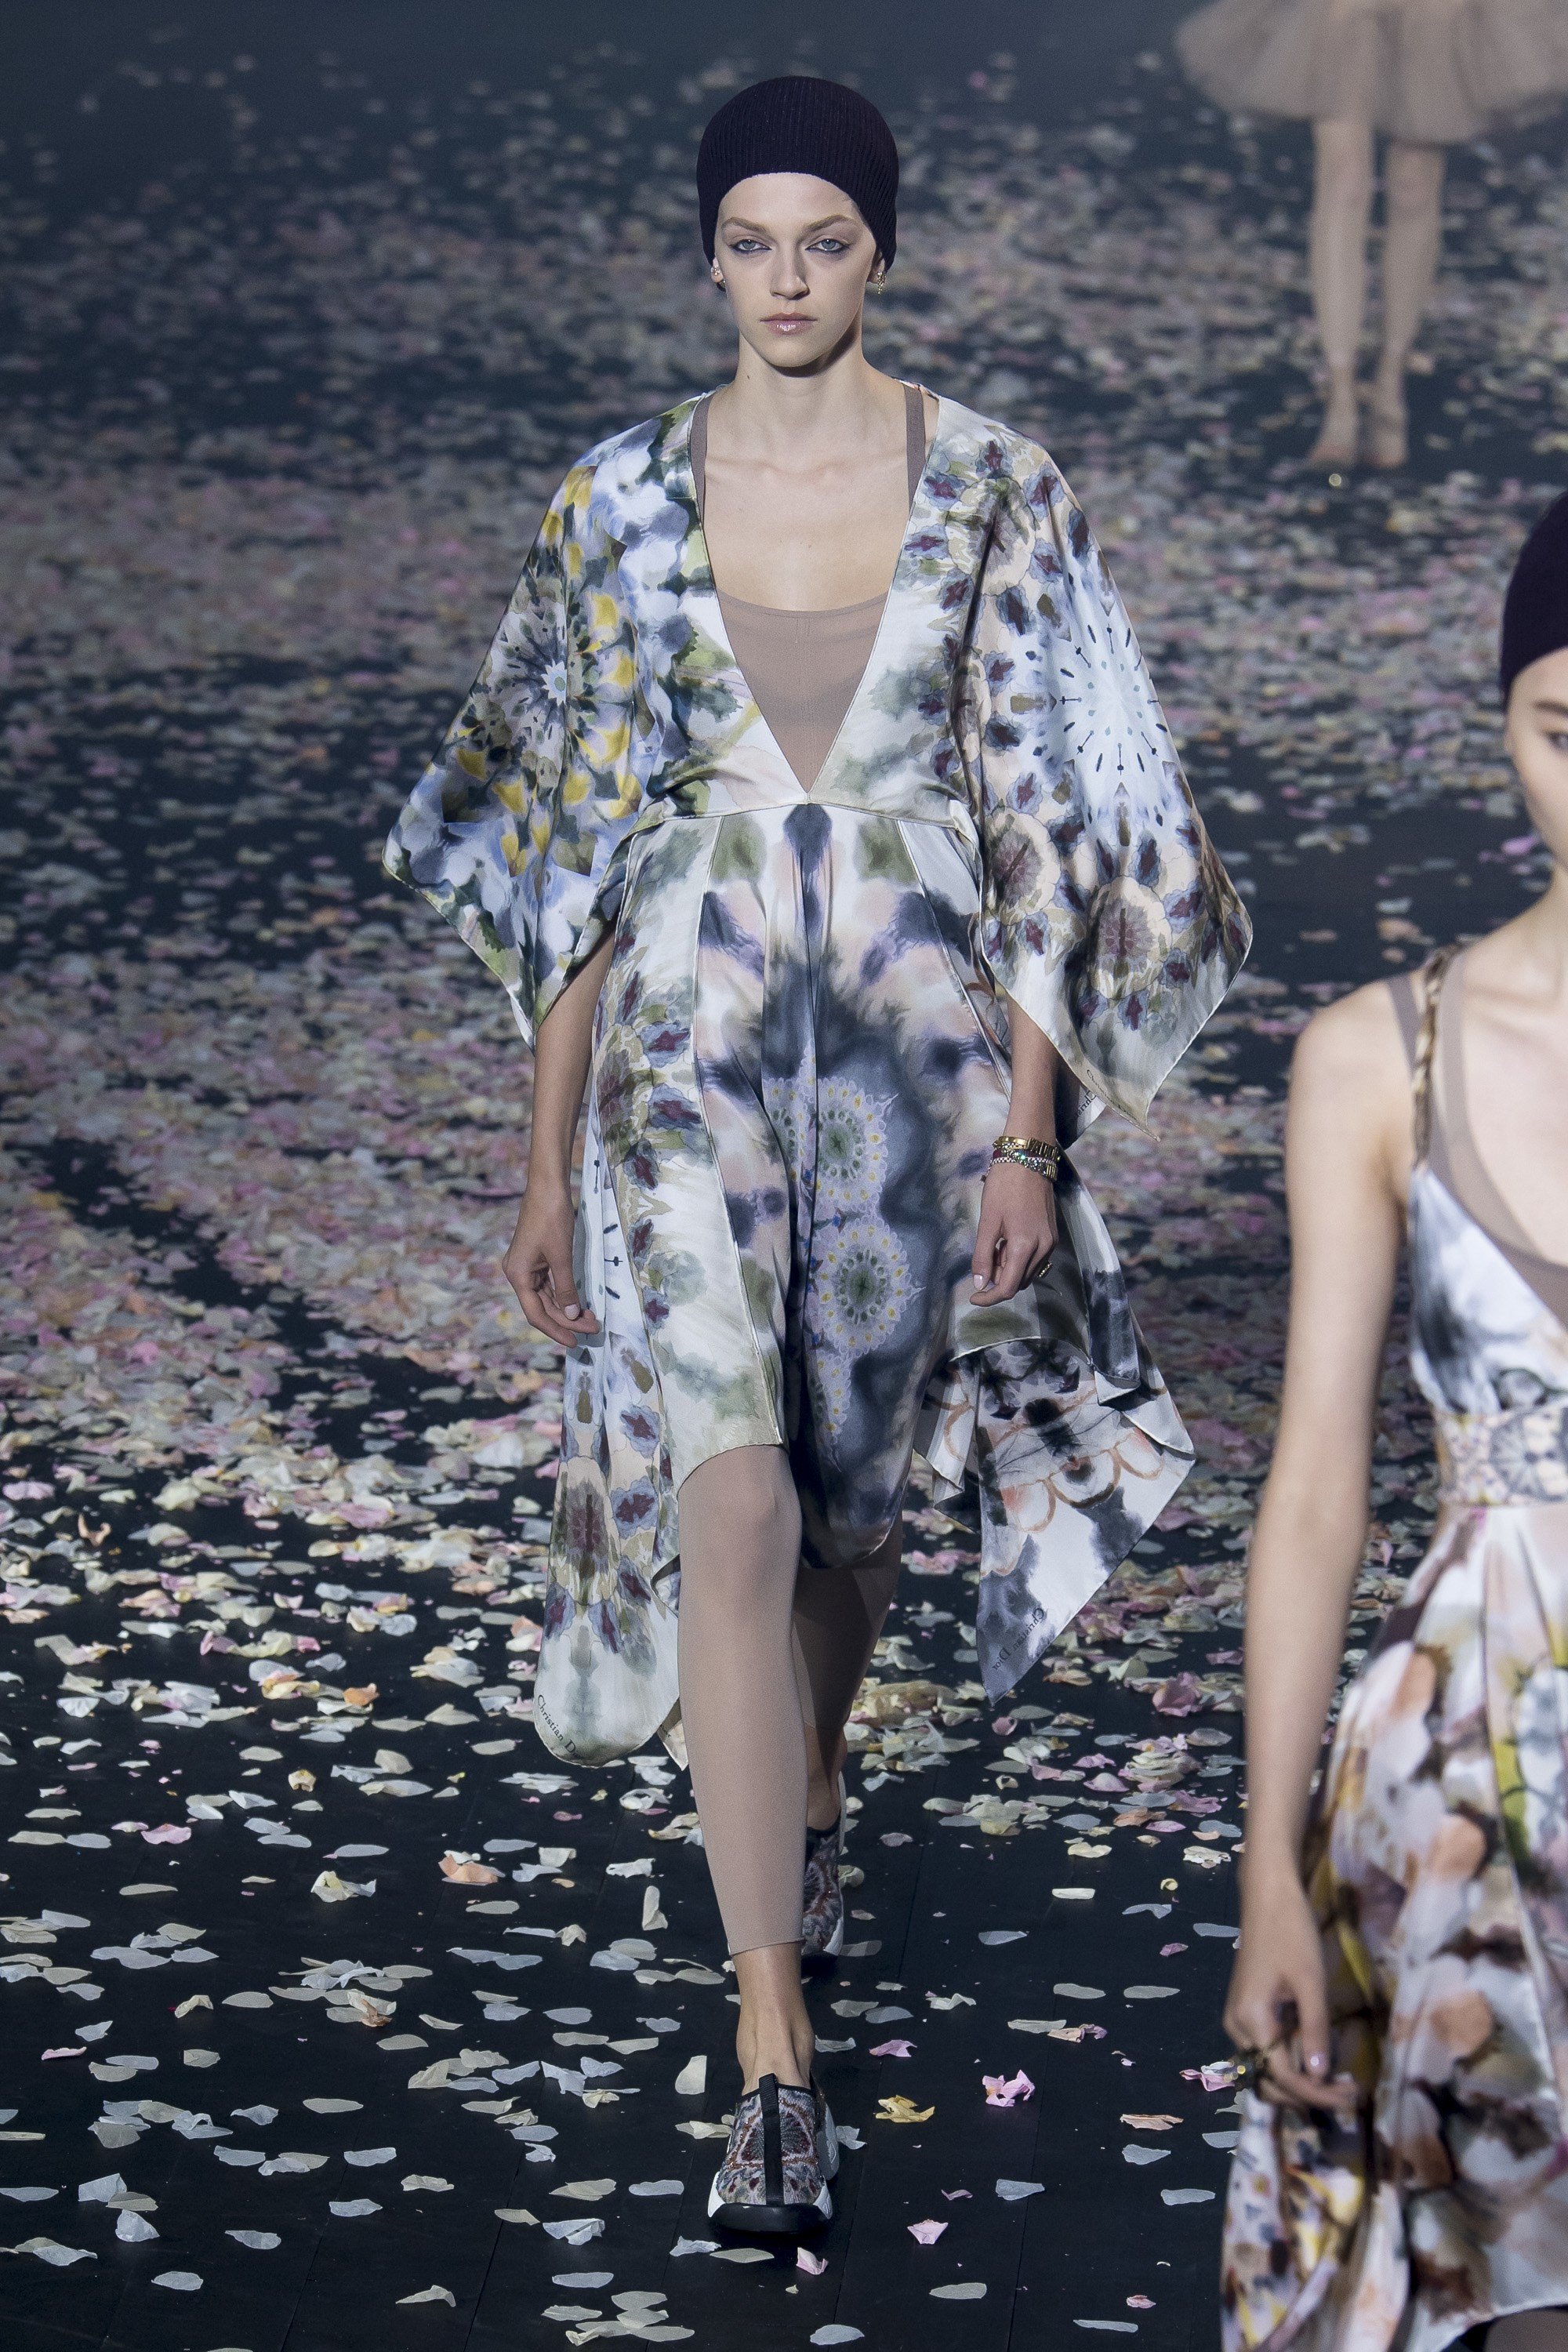 Dior has tapped into tie-dye for its spring/summer 2019 collection.